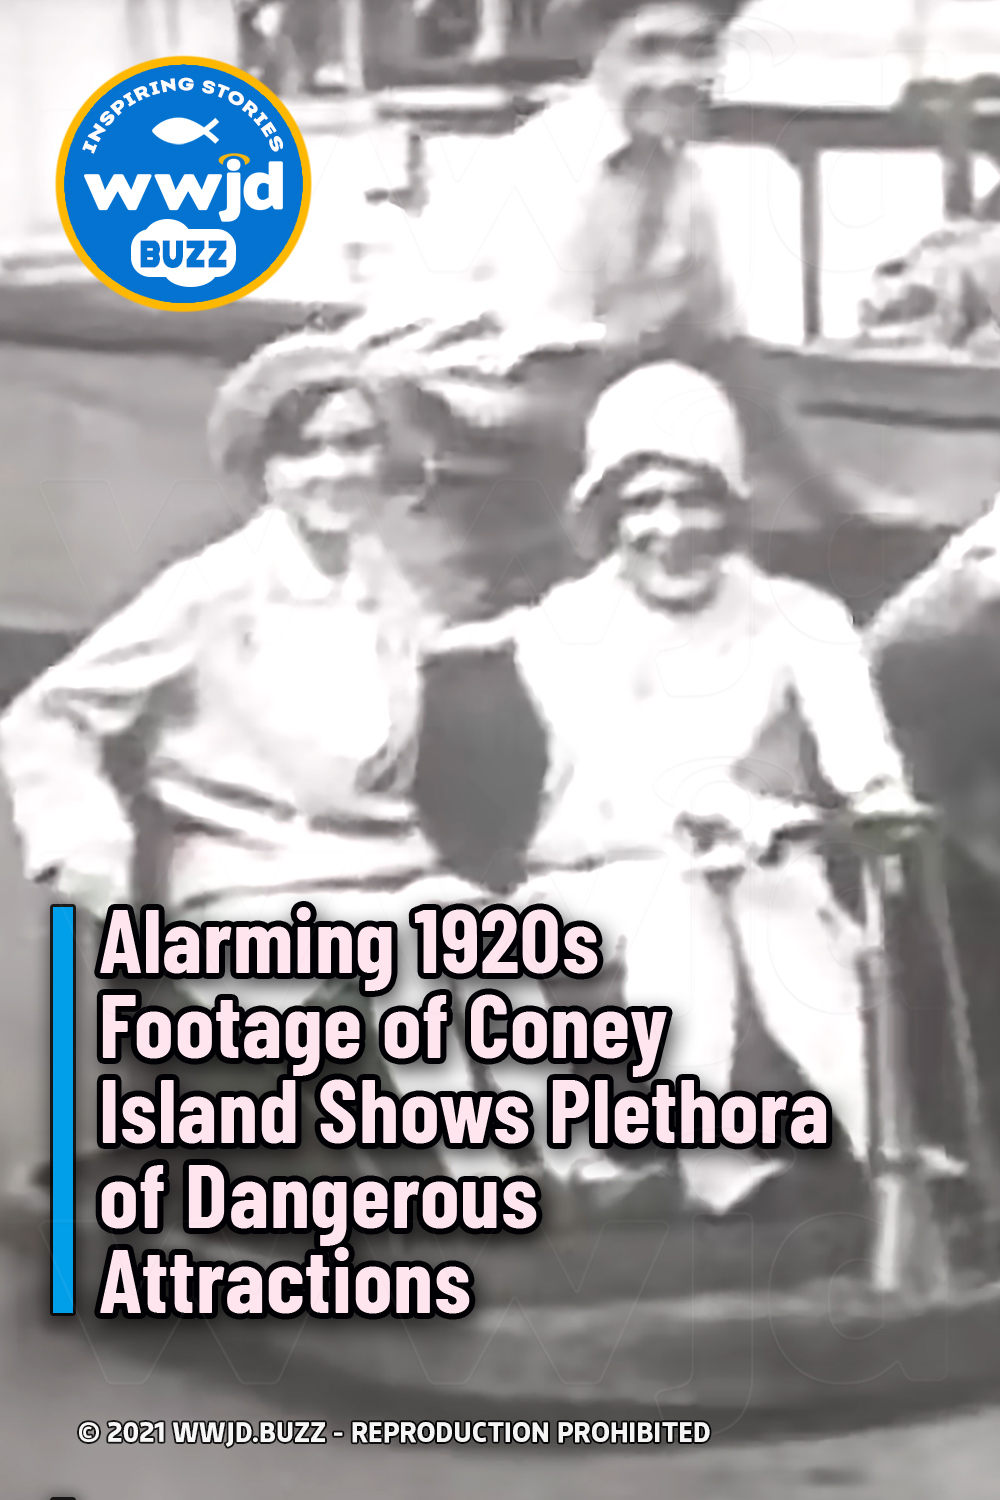 Alarming 1920s Footage of Coney Island Shows Plethora of Dangerous Attractions